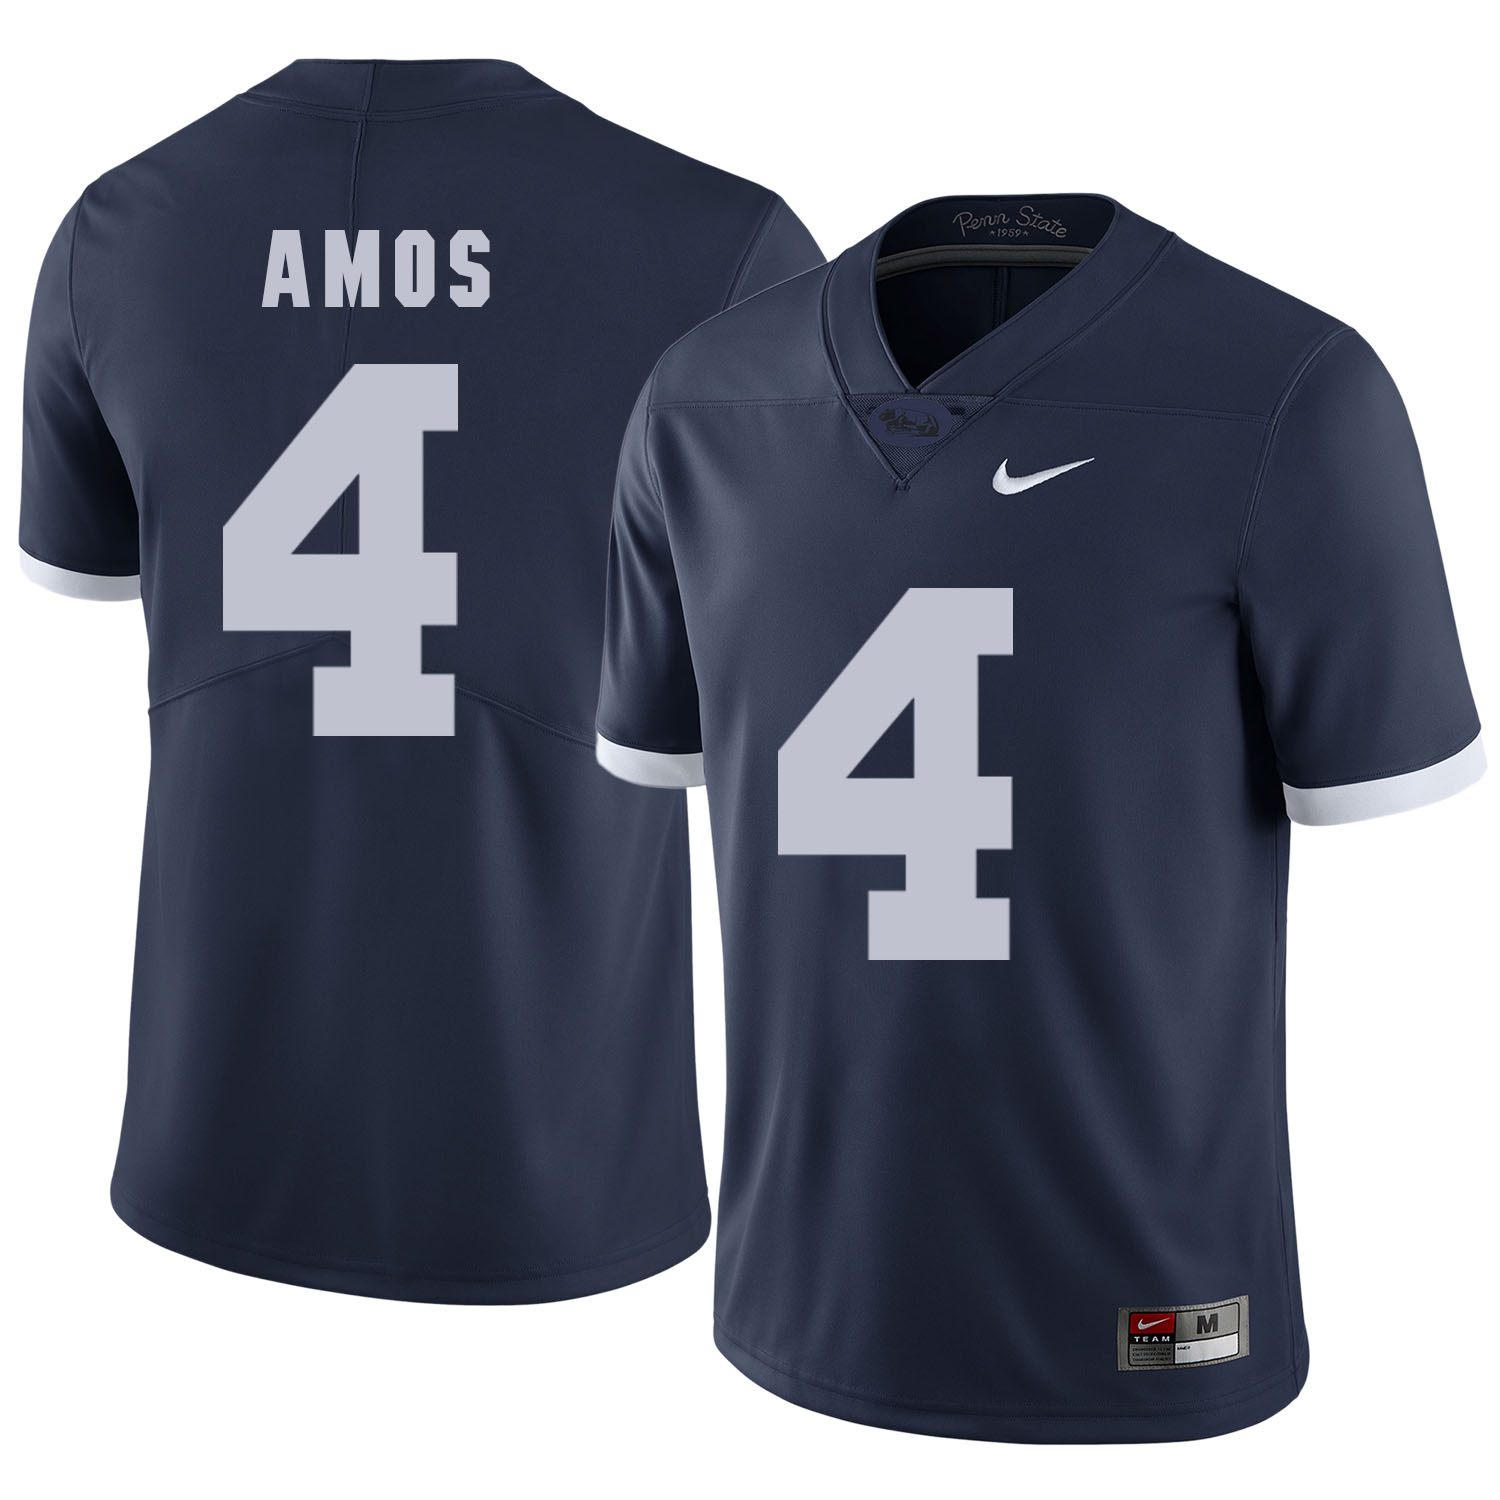 Penn State Nittany Lions 4 Adrian Amos Navy College Football Jersey